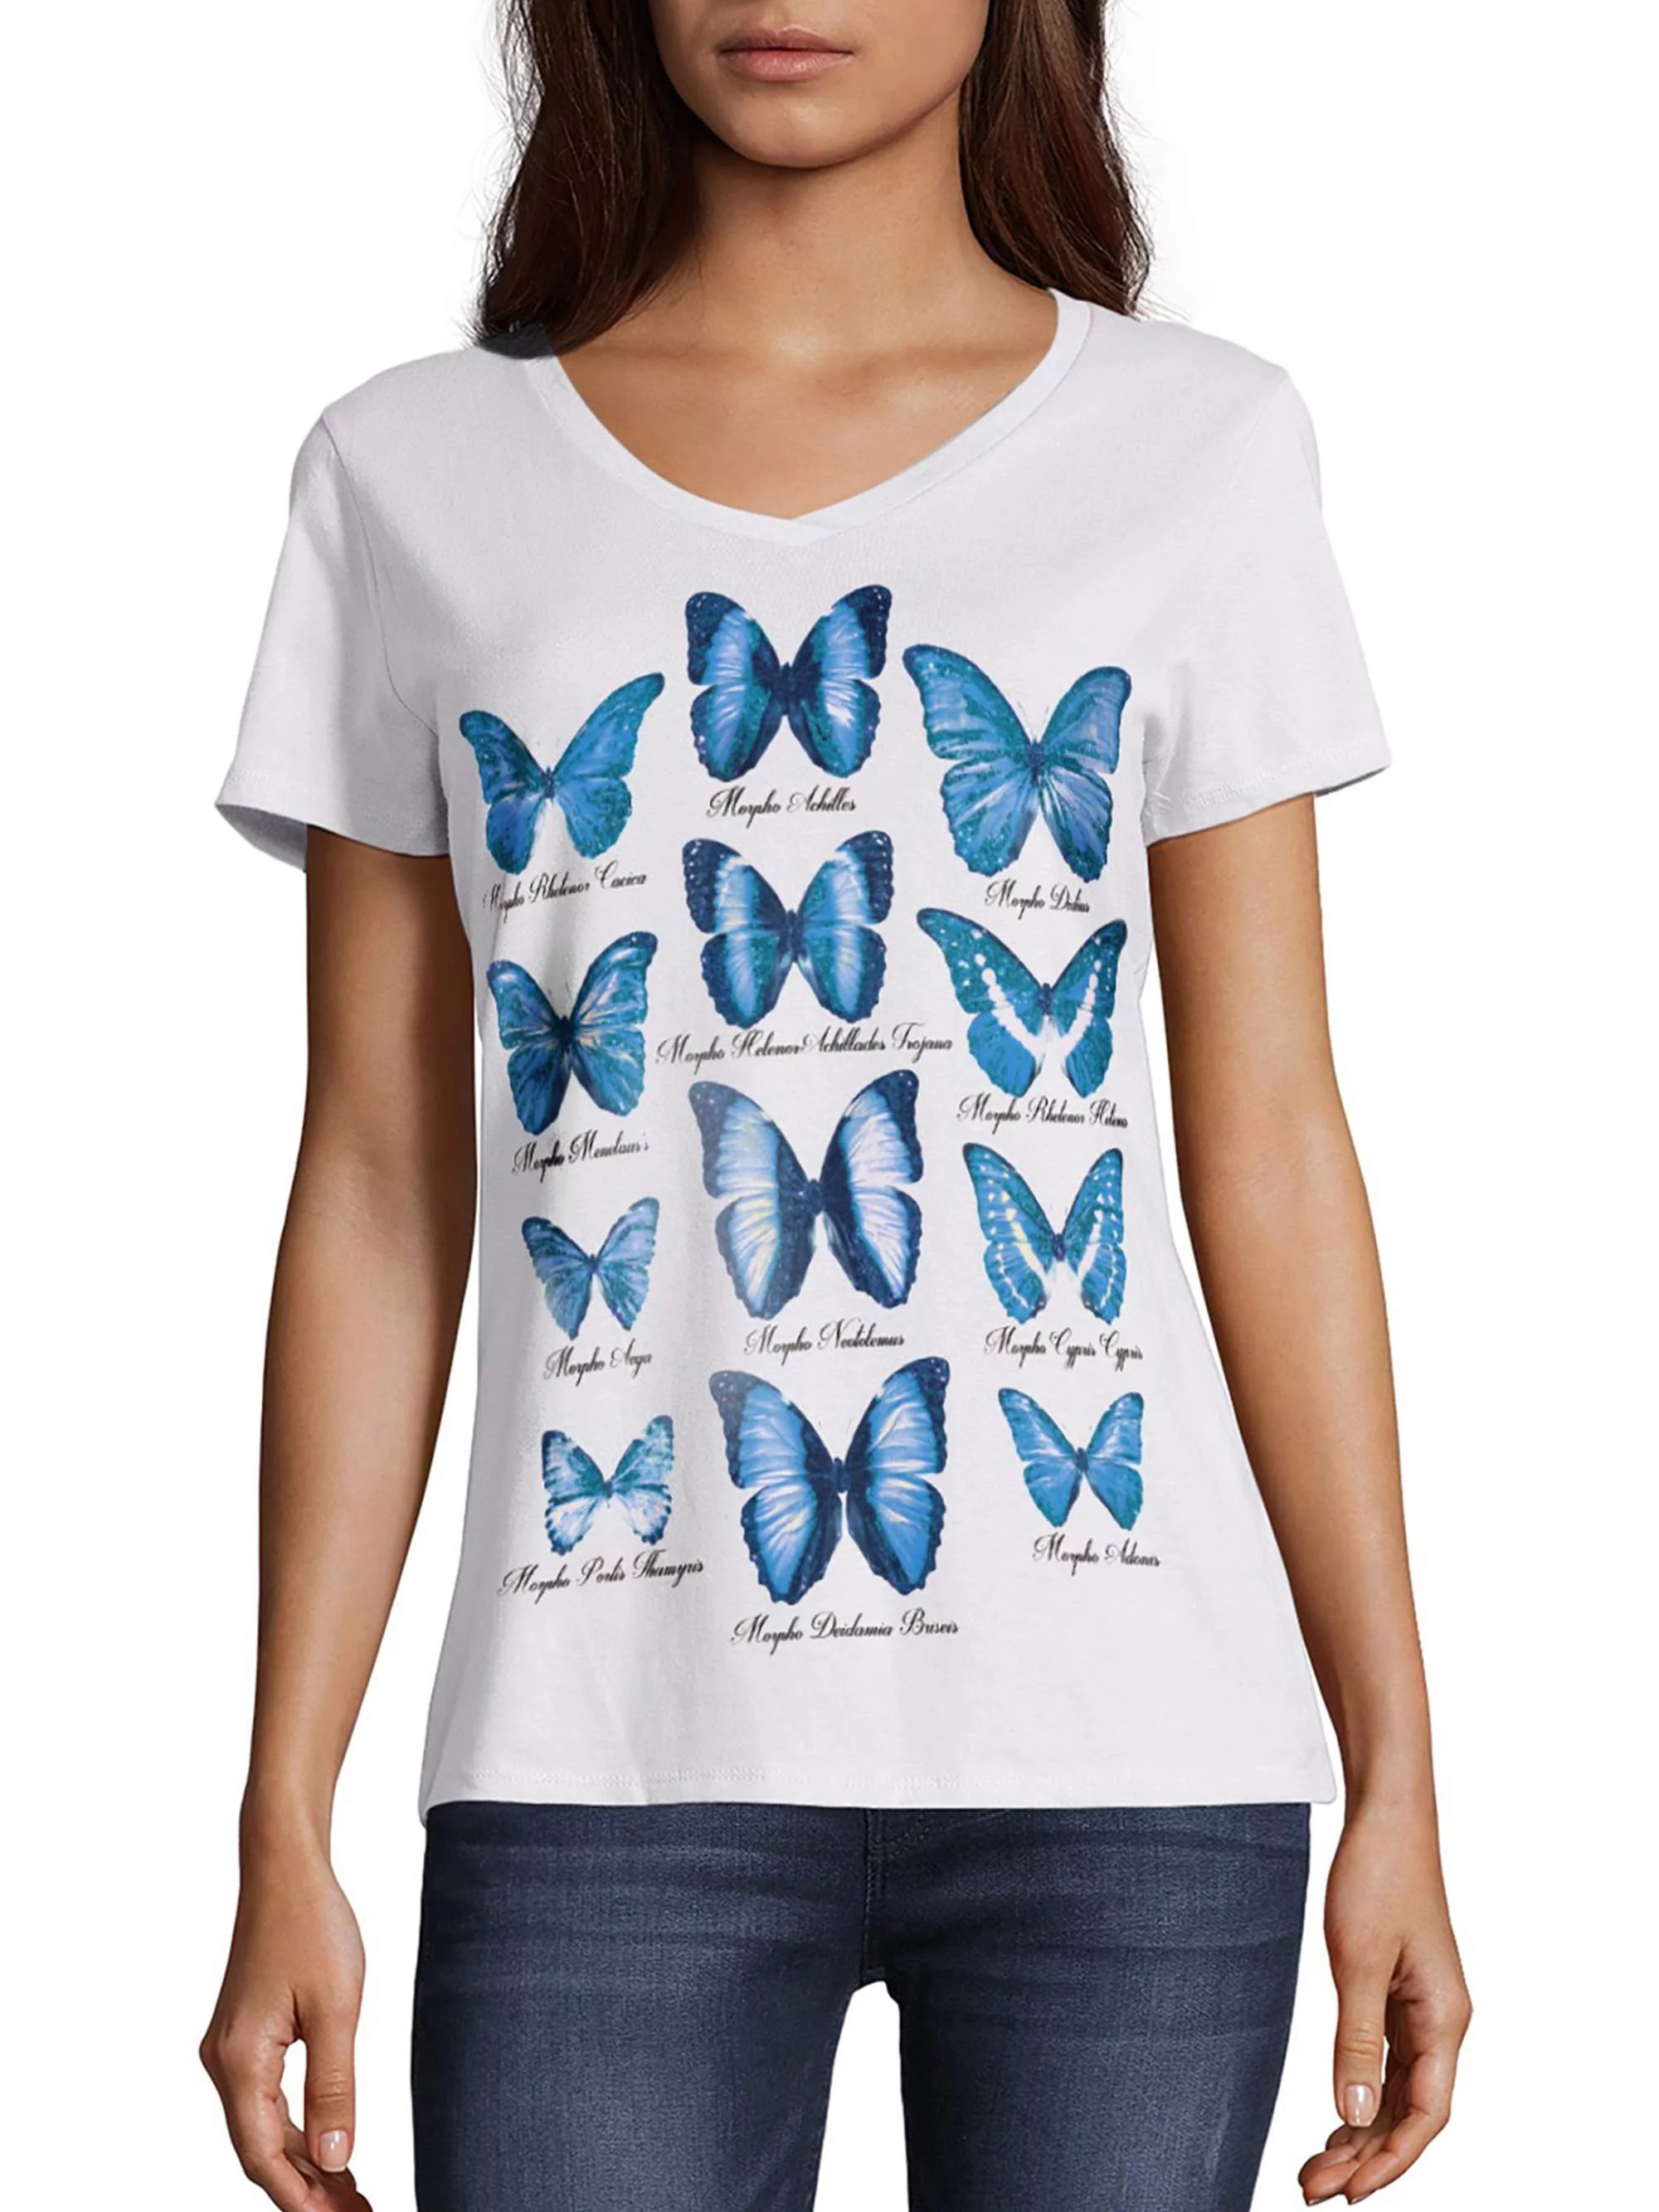 Model wearing the butterfly collection tee